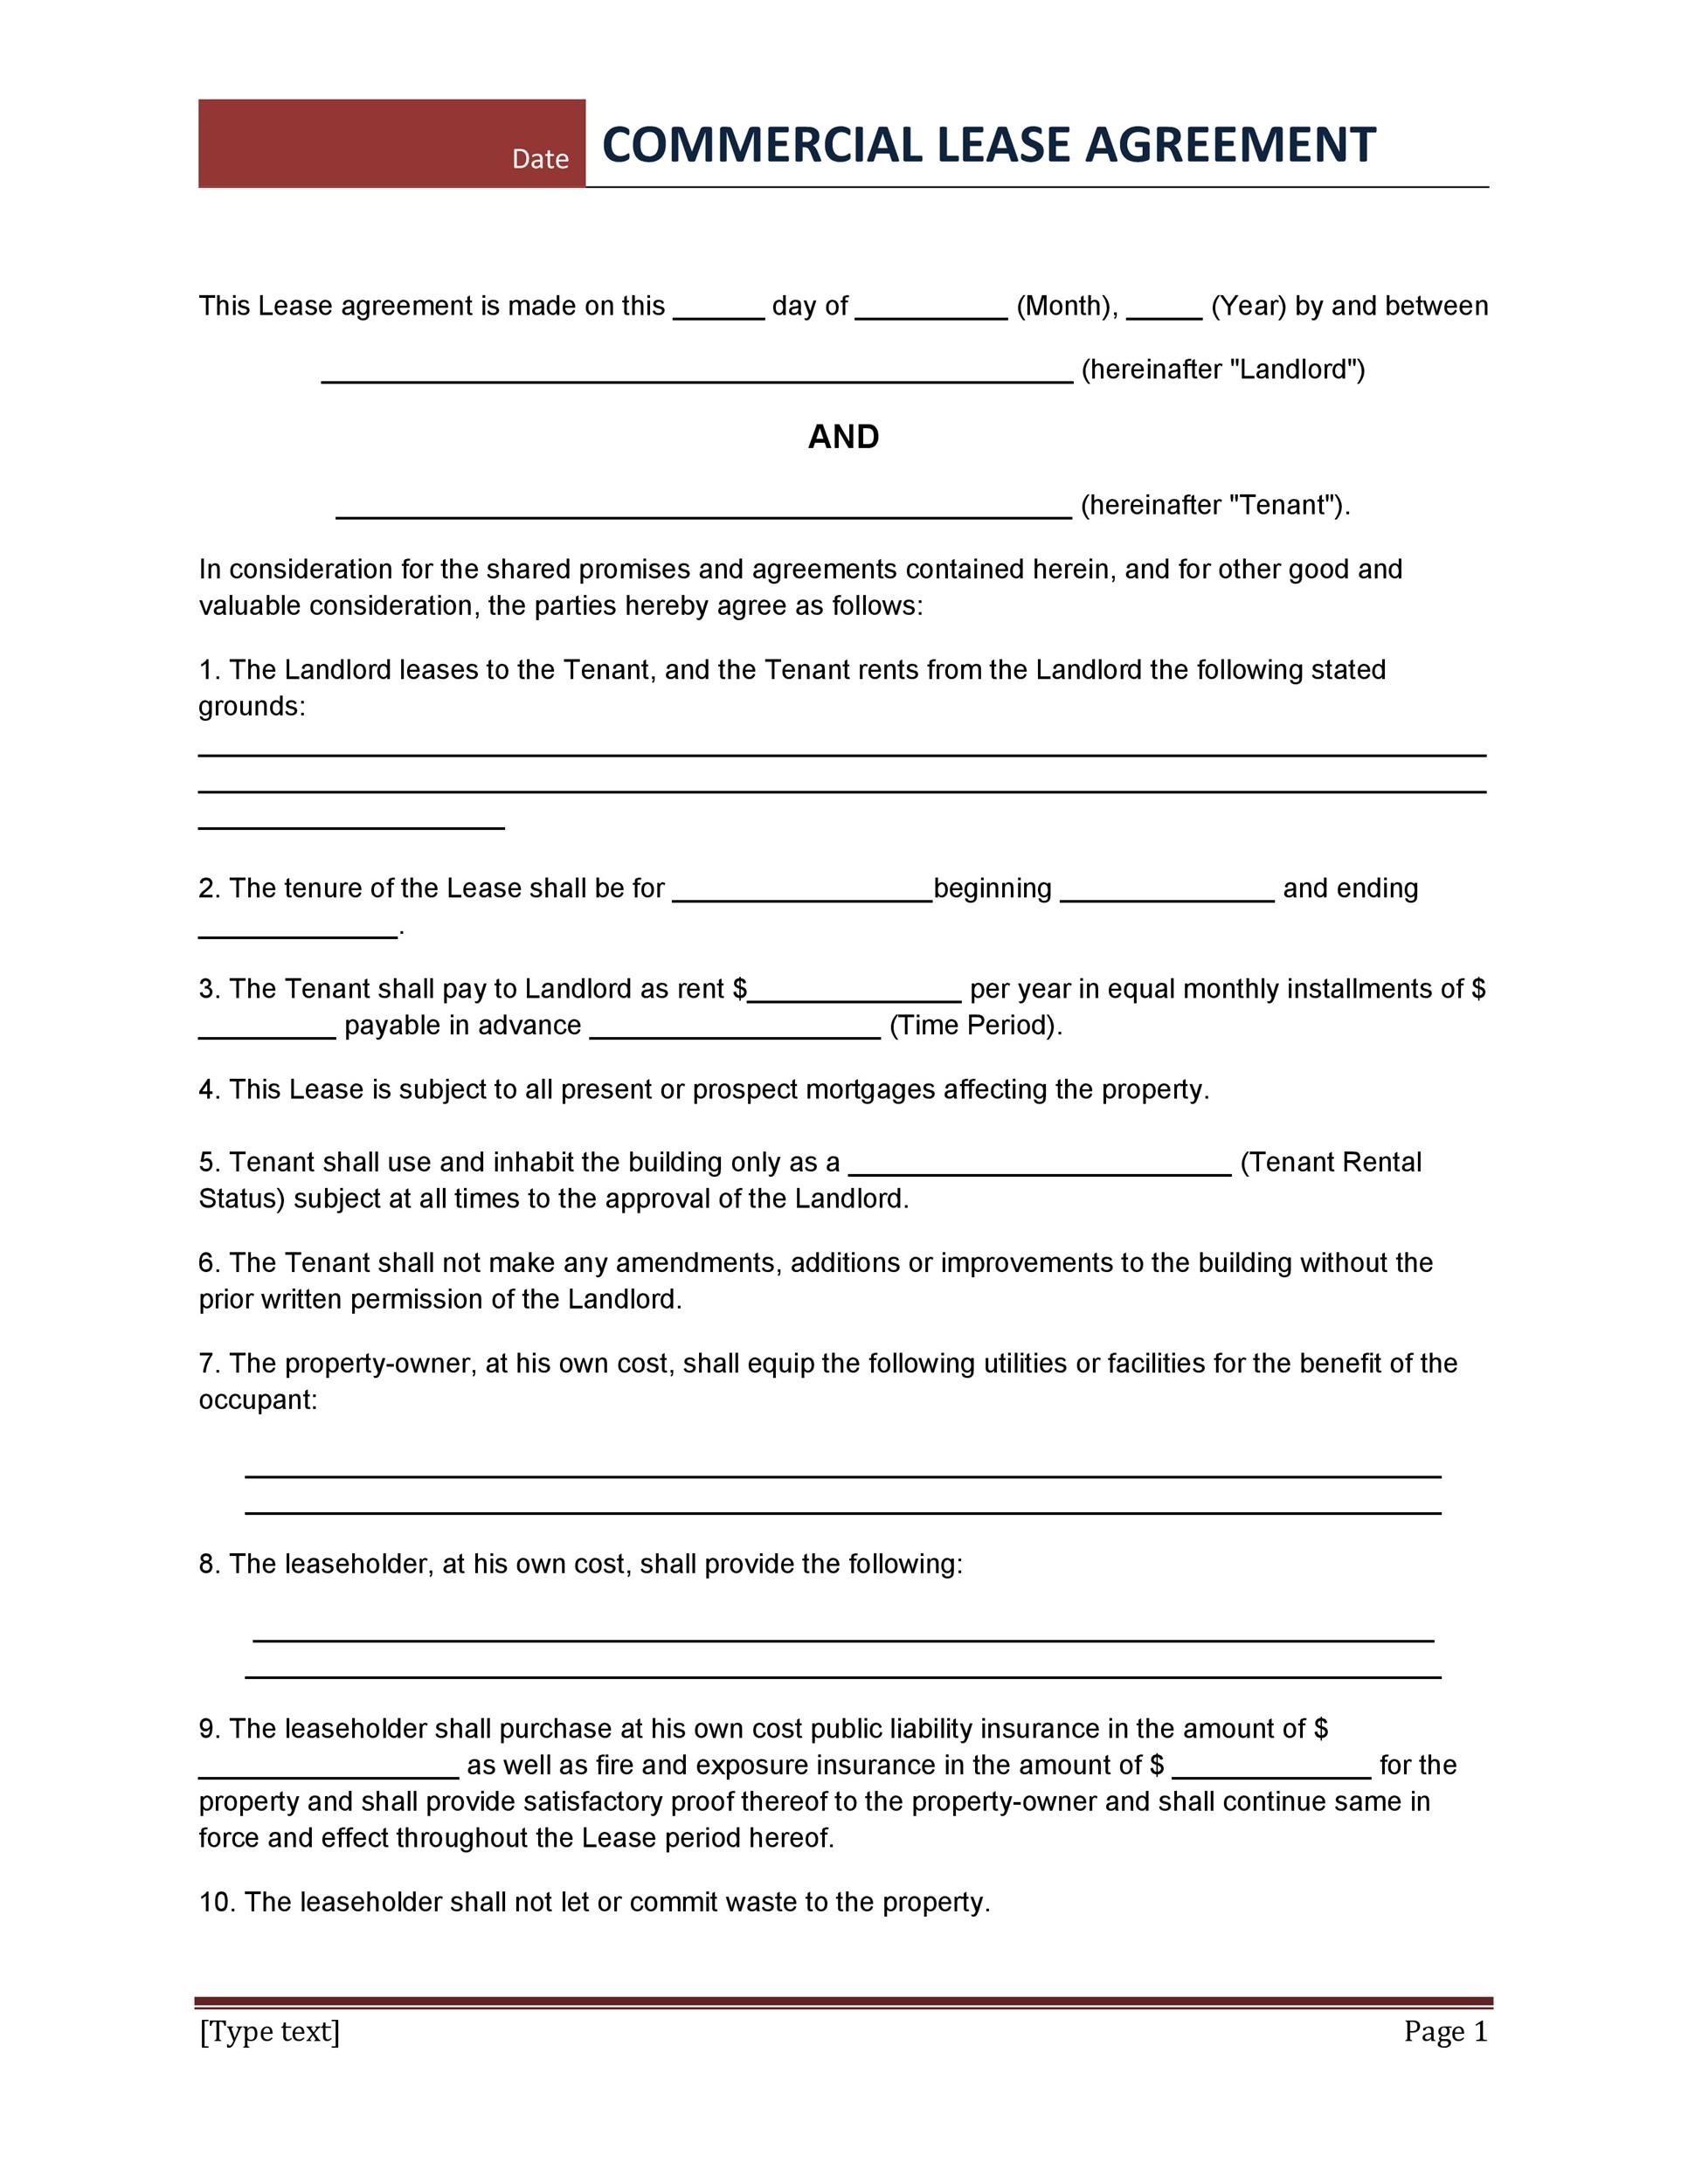 assignment of the lease agreement